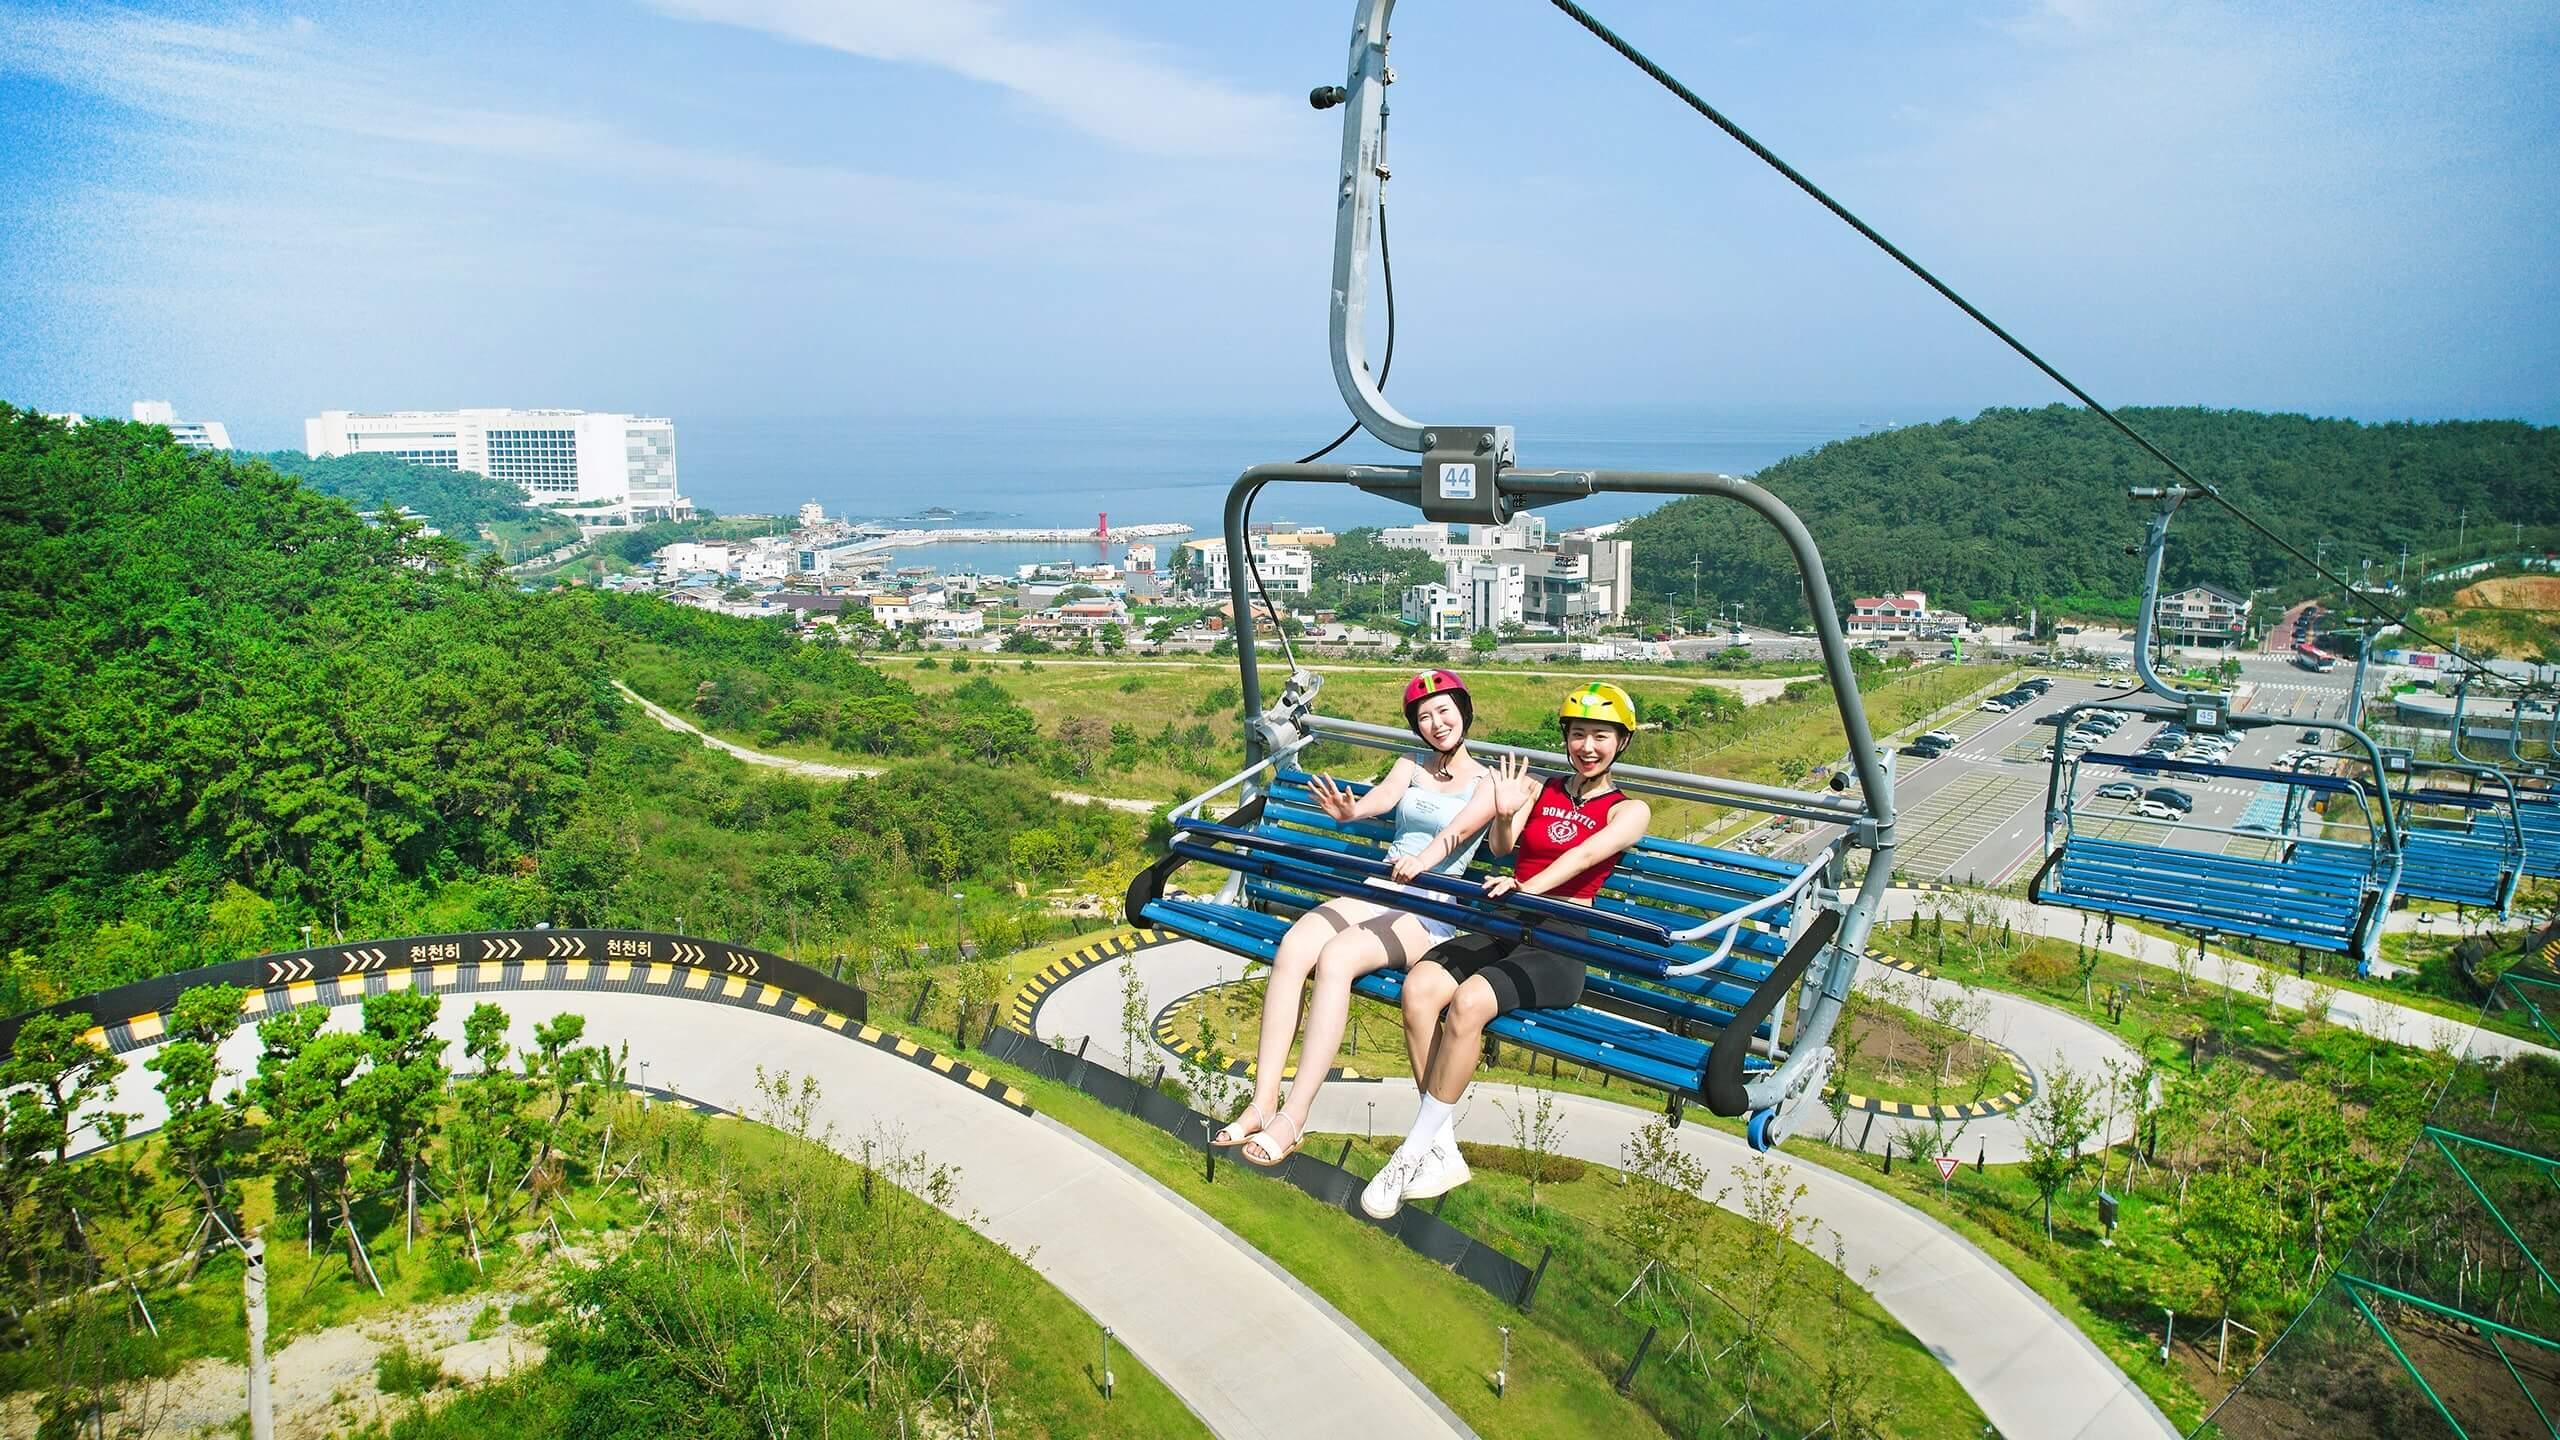 Two friends wave while riding the Busan Luge chairlift.